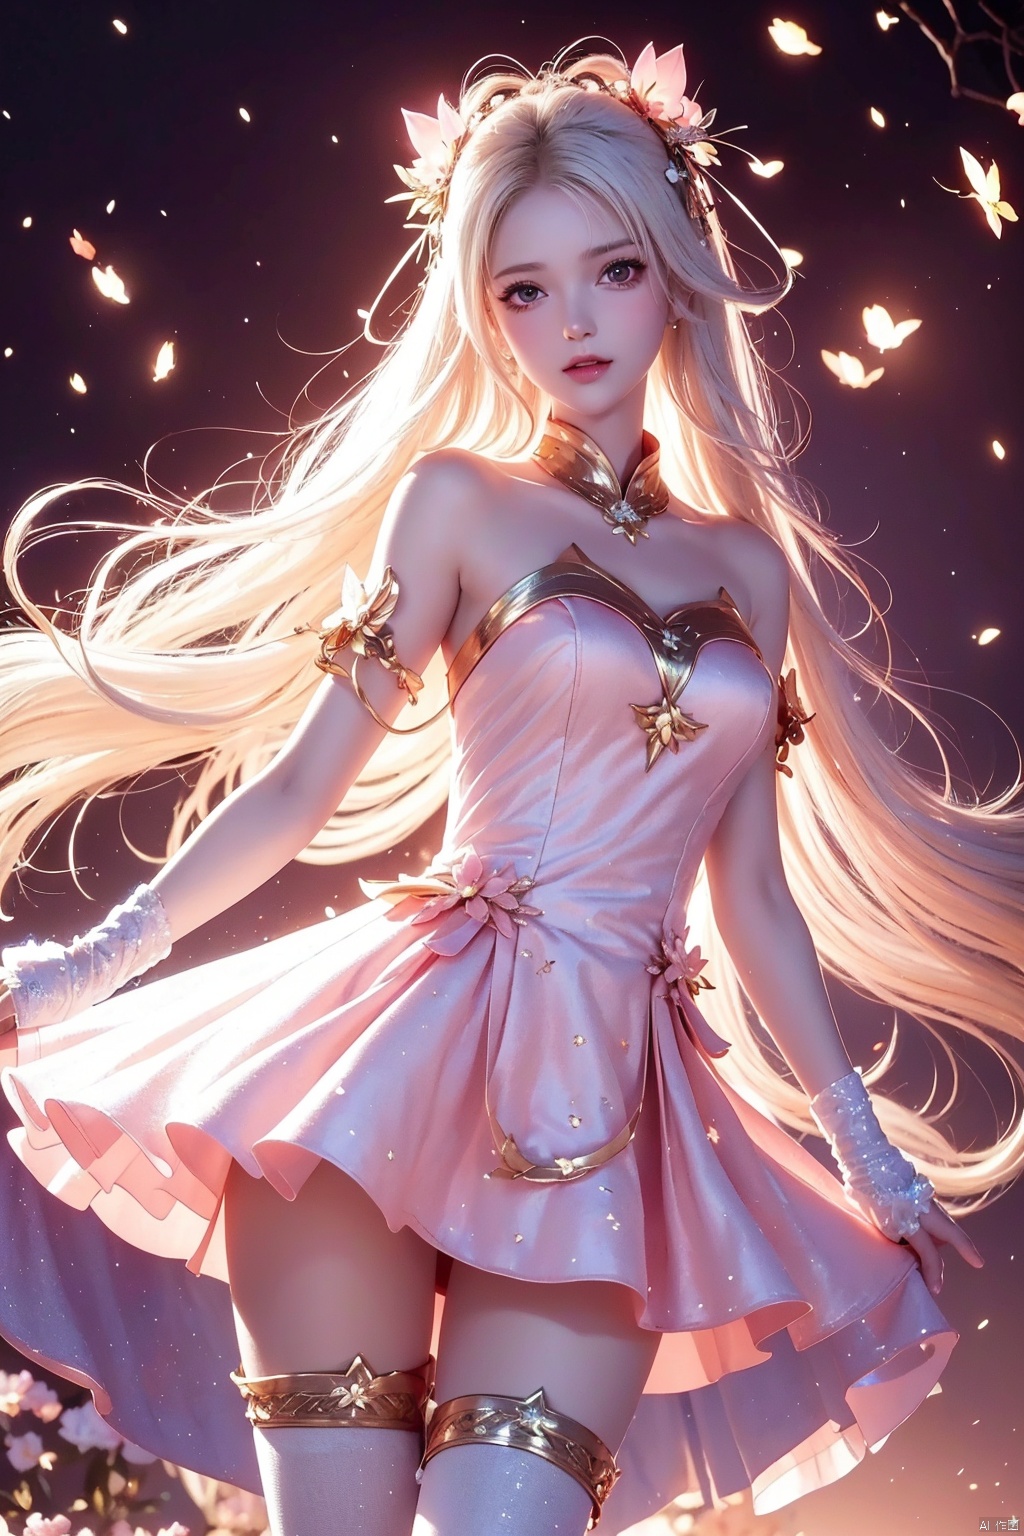  (three quarters body shot:1.4),(masterpiece),(top quality, best quality, official art, beauty and aesthetics:1.2),cg photos,white hair,(solo:1.2),mature_female,Peach blossoms, pink clothes, short skirts, white stockings,closed_mouth,bare_shoulders,(tight:1.2),bare_shoulder,Short neck,Bright tones,sexy girl,bright,light,Royal Sister,night,,RoyalSister face,,round face,baby face,print,looking_at_viewer,Peach blossoms,pink flower,pink petal,starry,star_(sky), RoyalSister Face